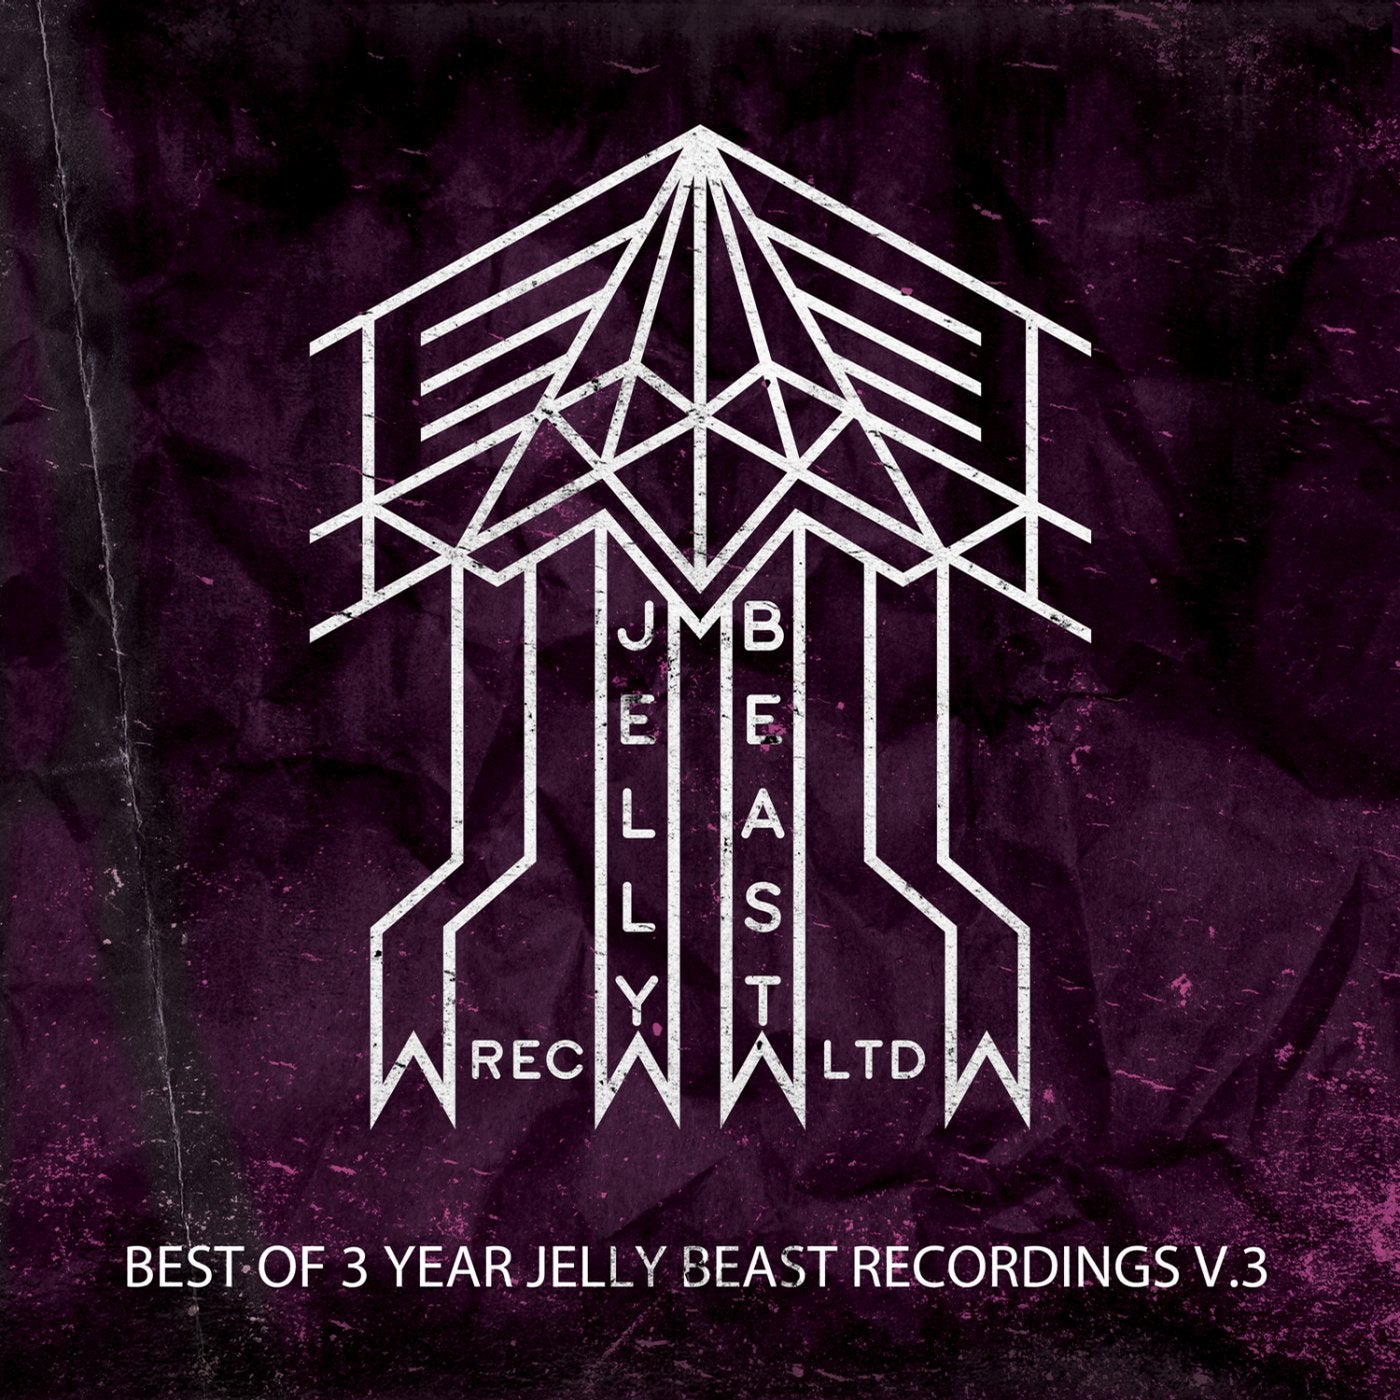 Jelly Beast 3 Years (Top Remixes Part 2)